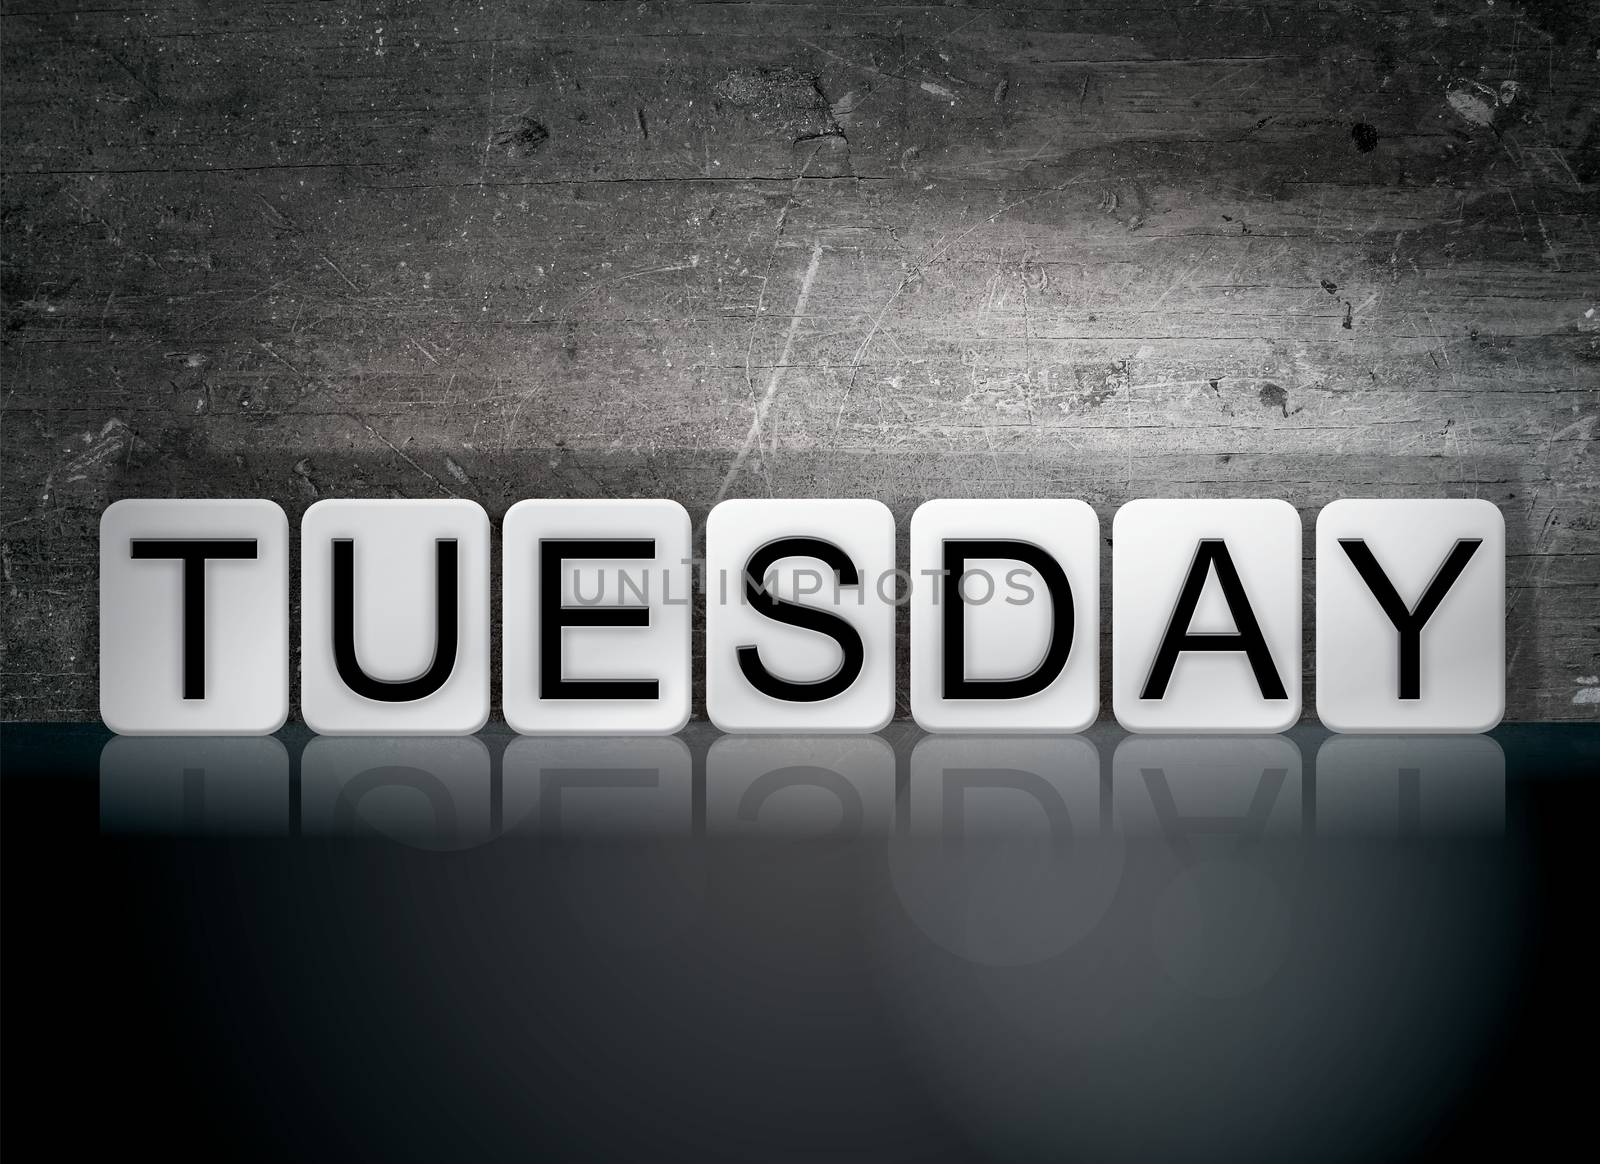 Tuesday Tiled Letters Concept and Theme by enterlinedesign